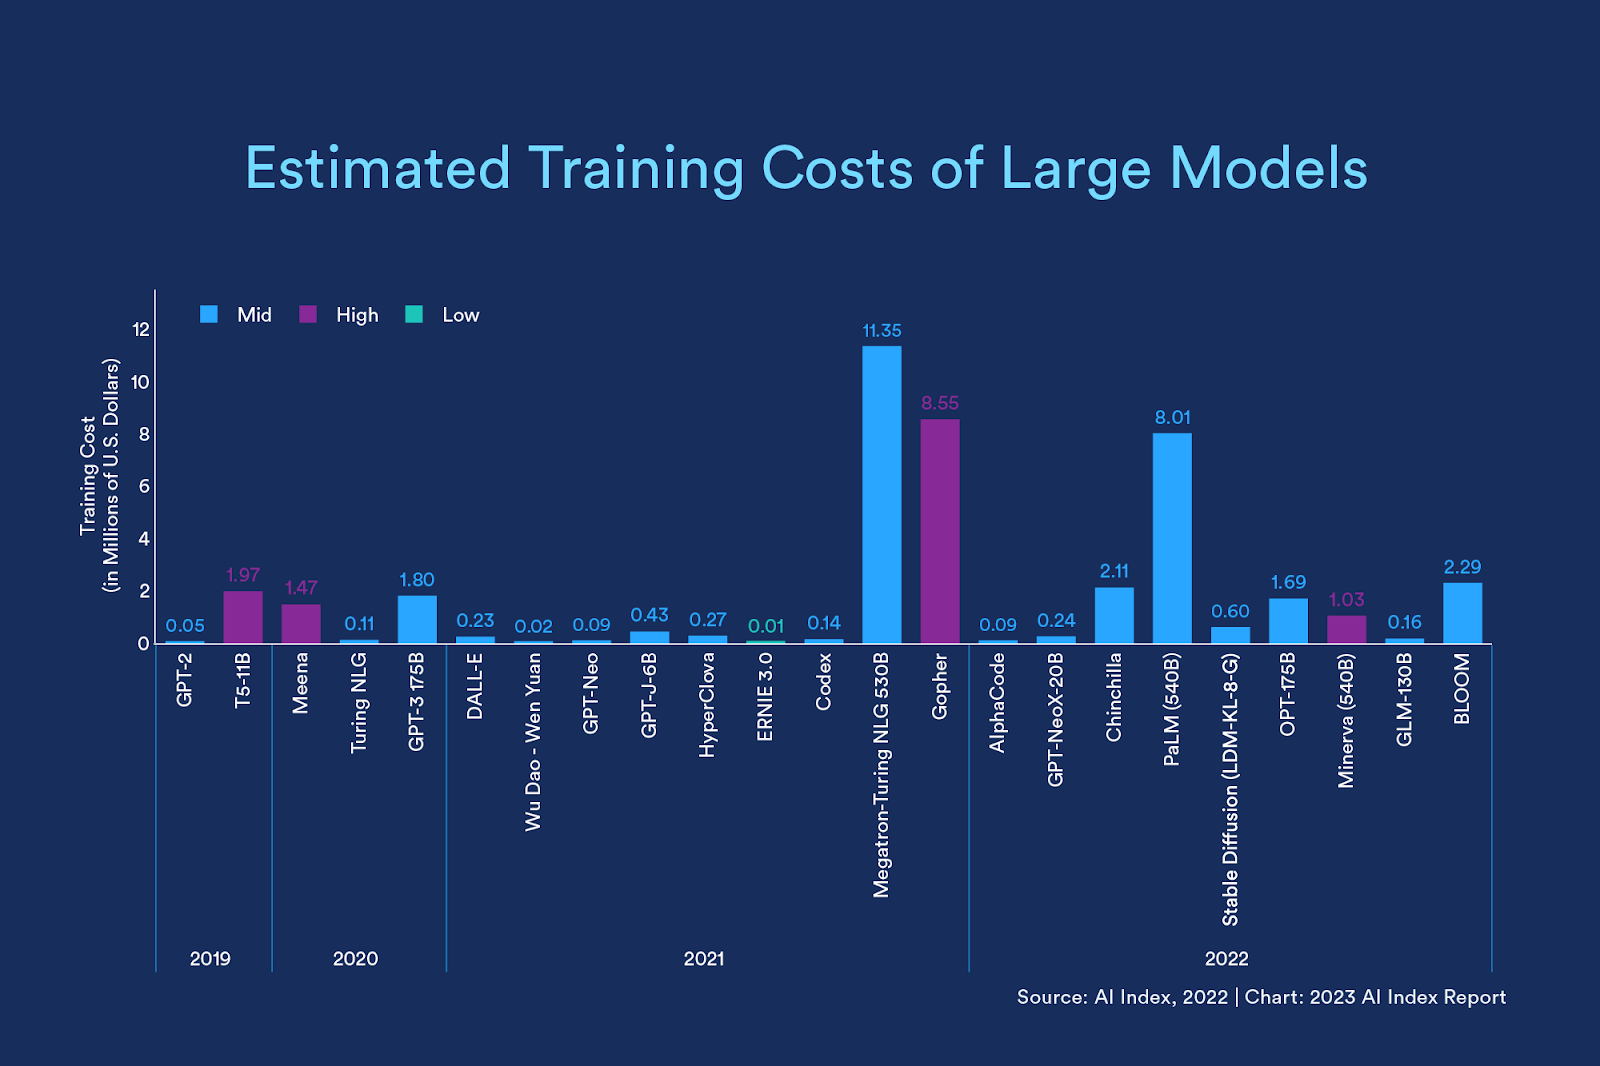 Estimated training costs of Large Models